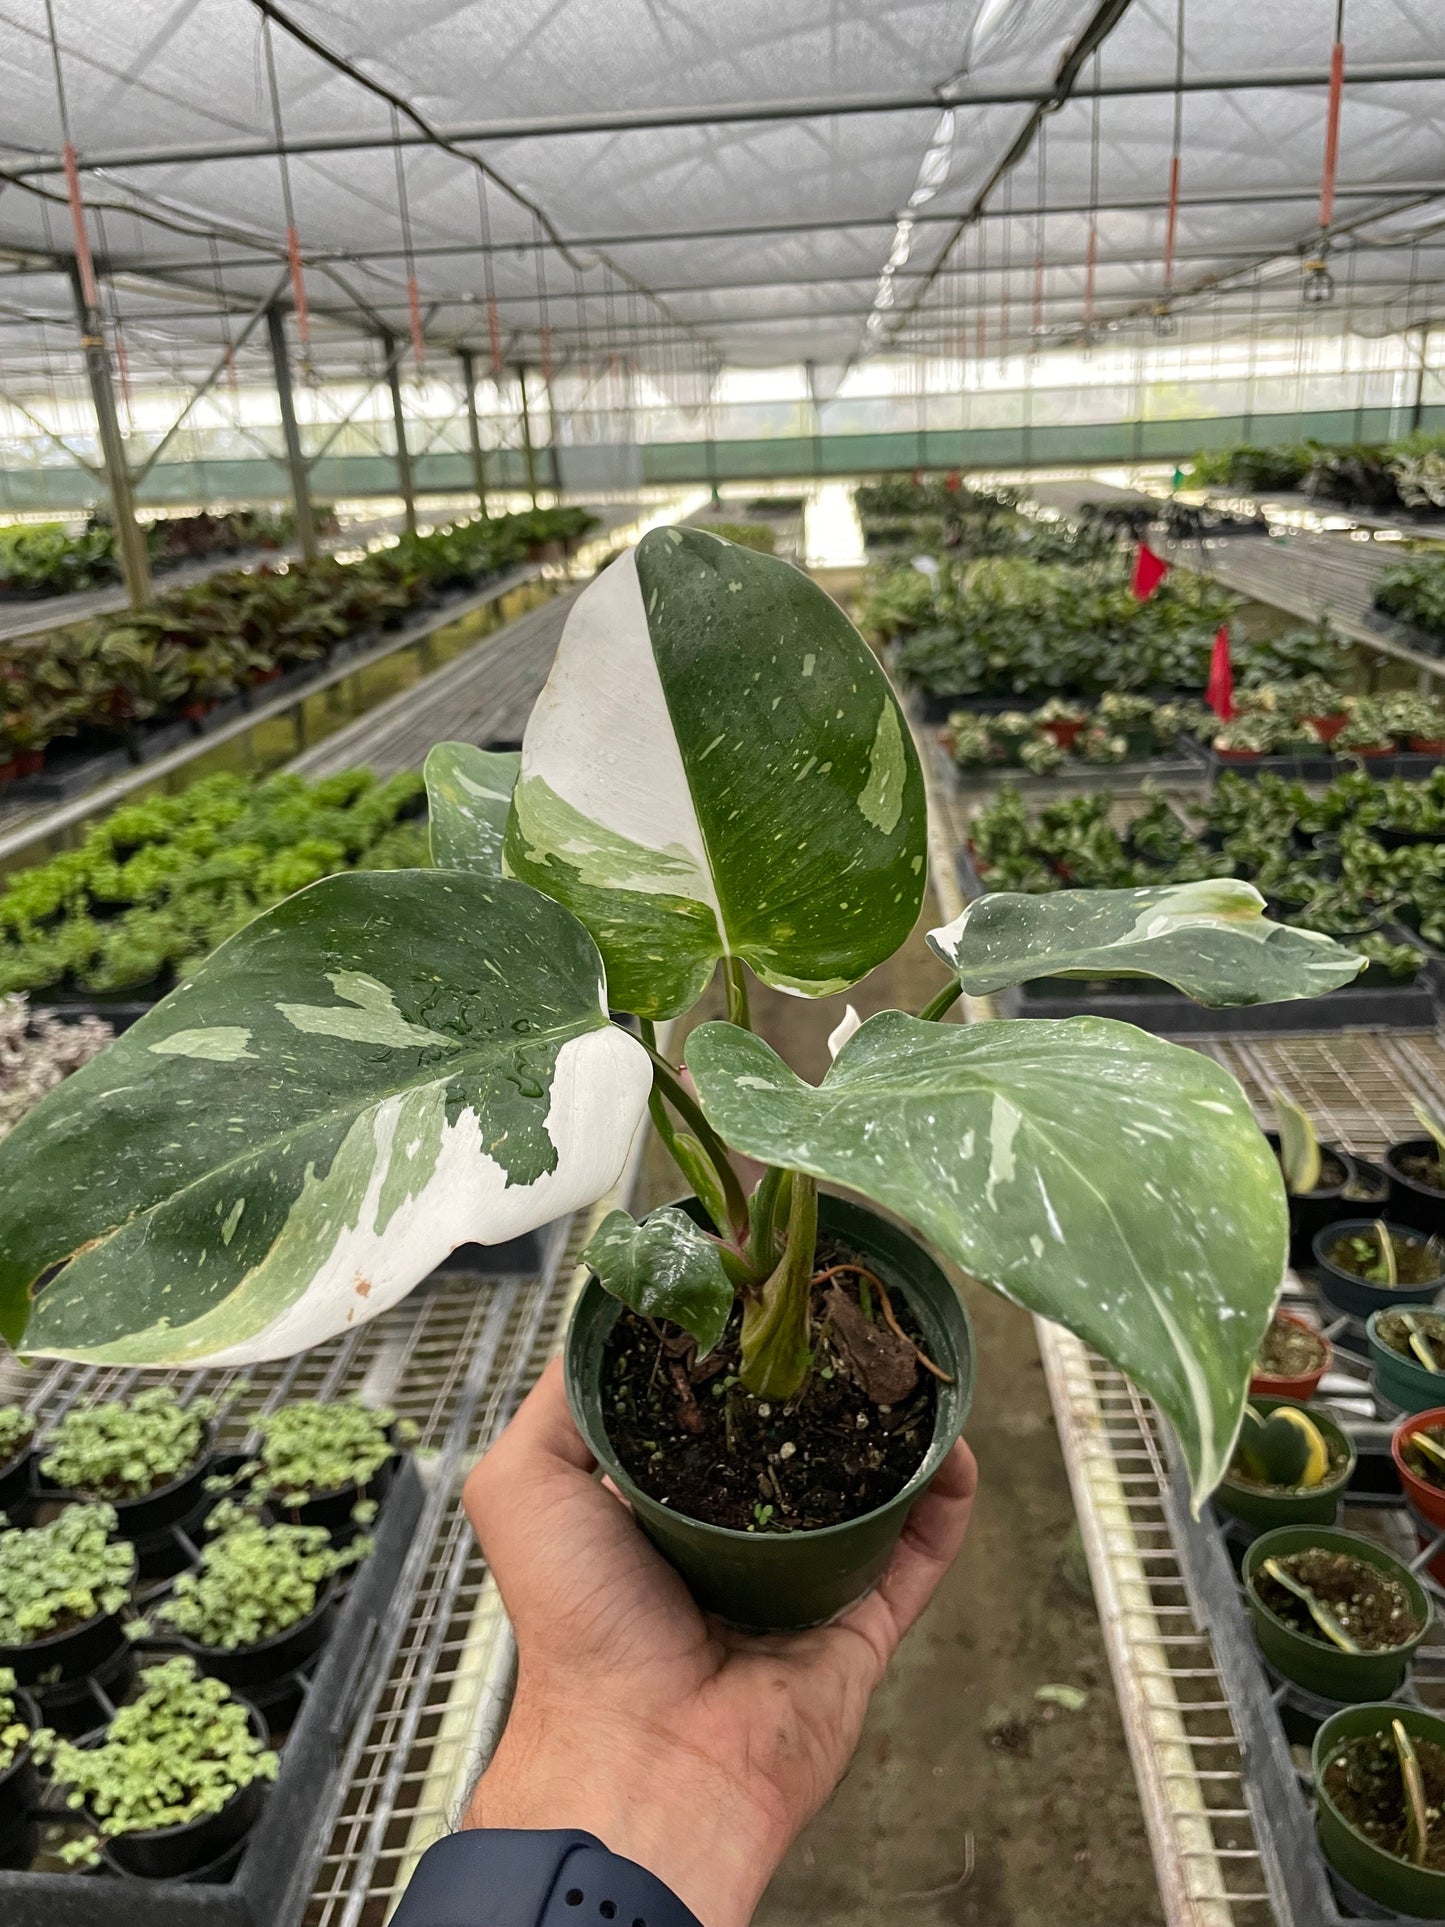 Philodendron Erubescens 'White Princess'- Stunning, White Variegated Leaves, Climbing Philodendron Plant- (4" or 6" Pot)